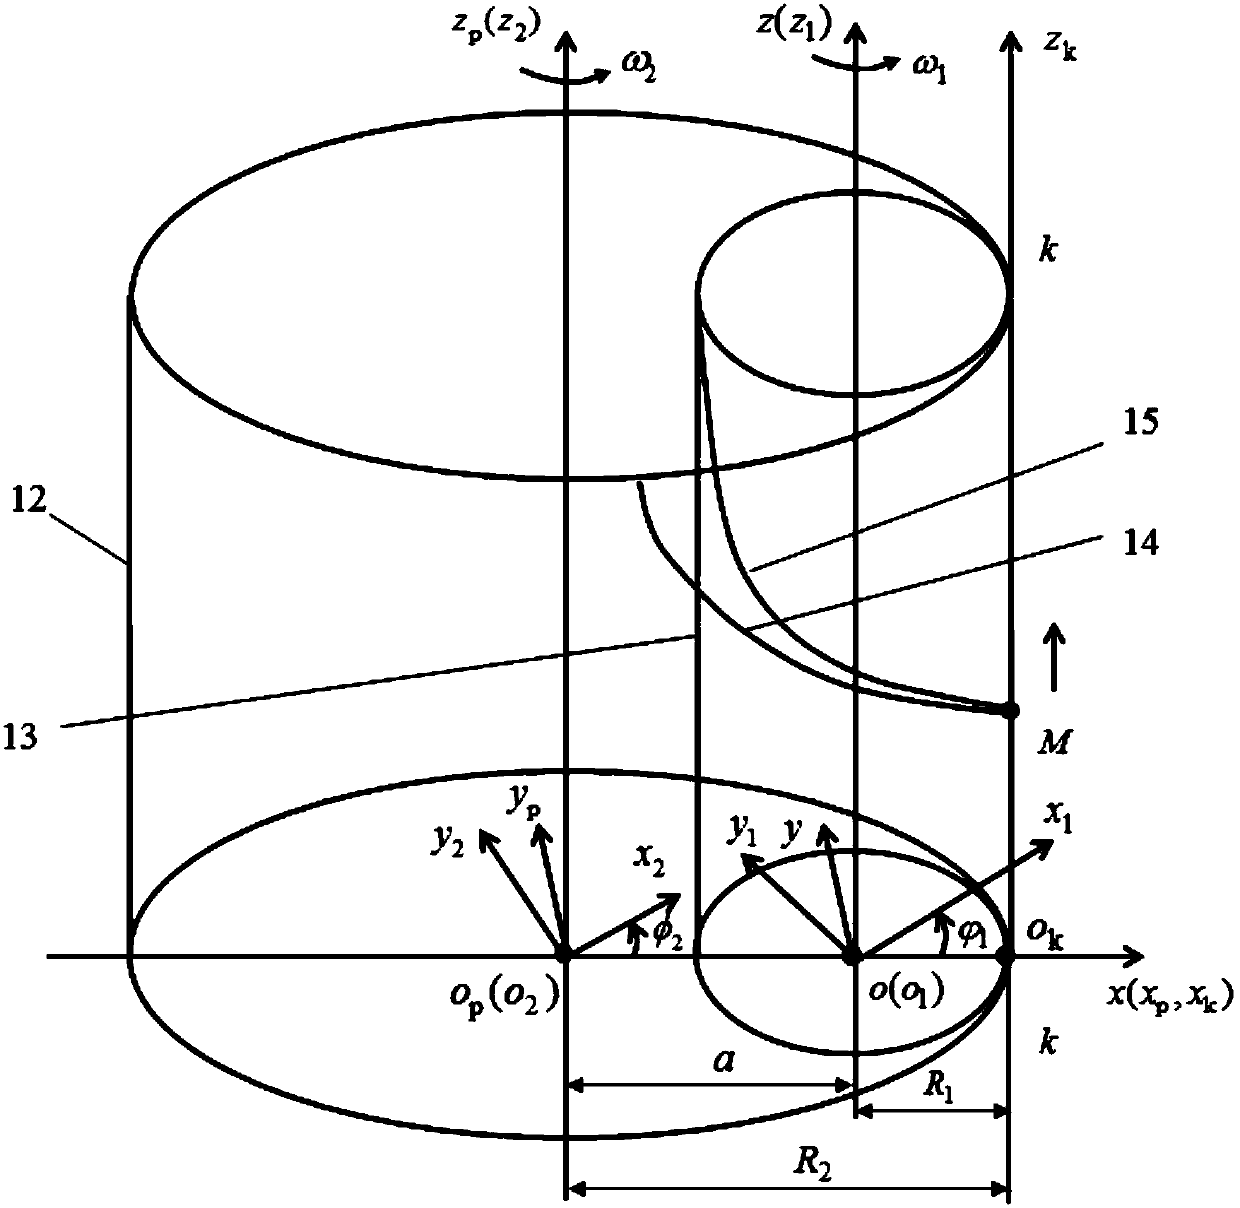 Flat-convex engaged pure rolling mechanism for inside engaging transmission of parallel shafts